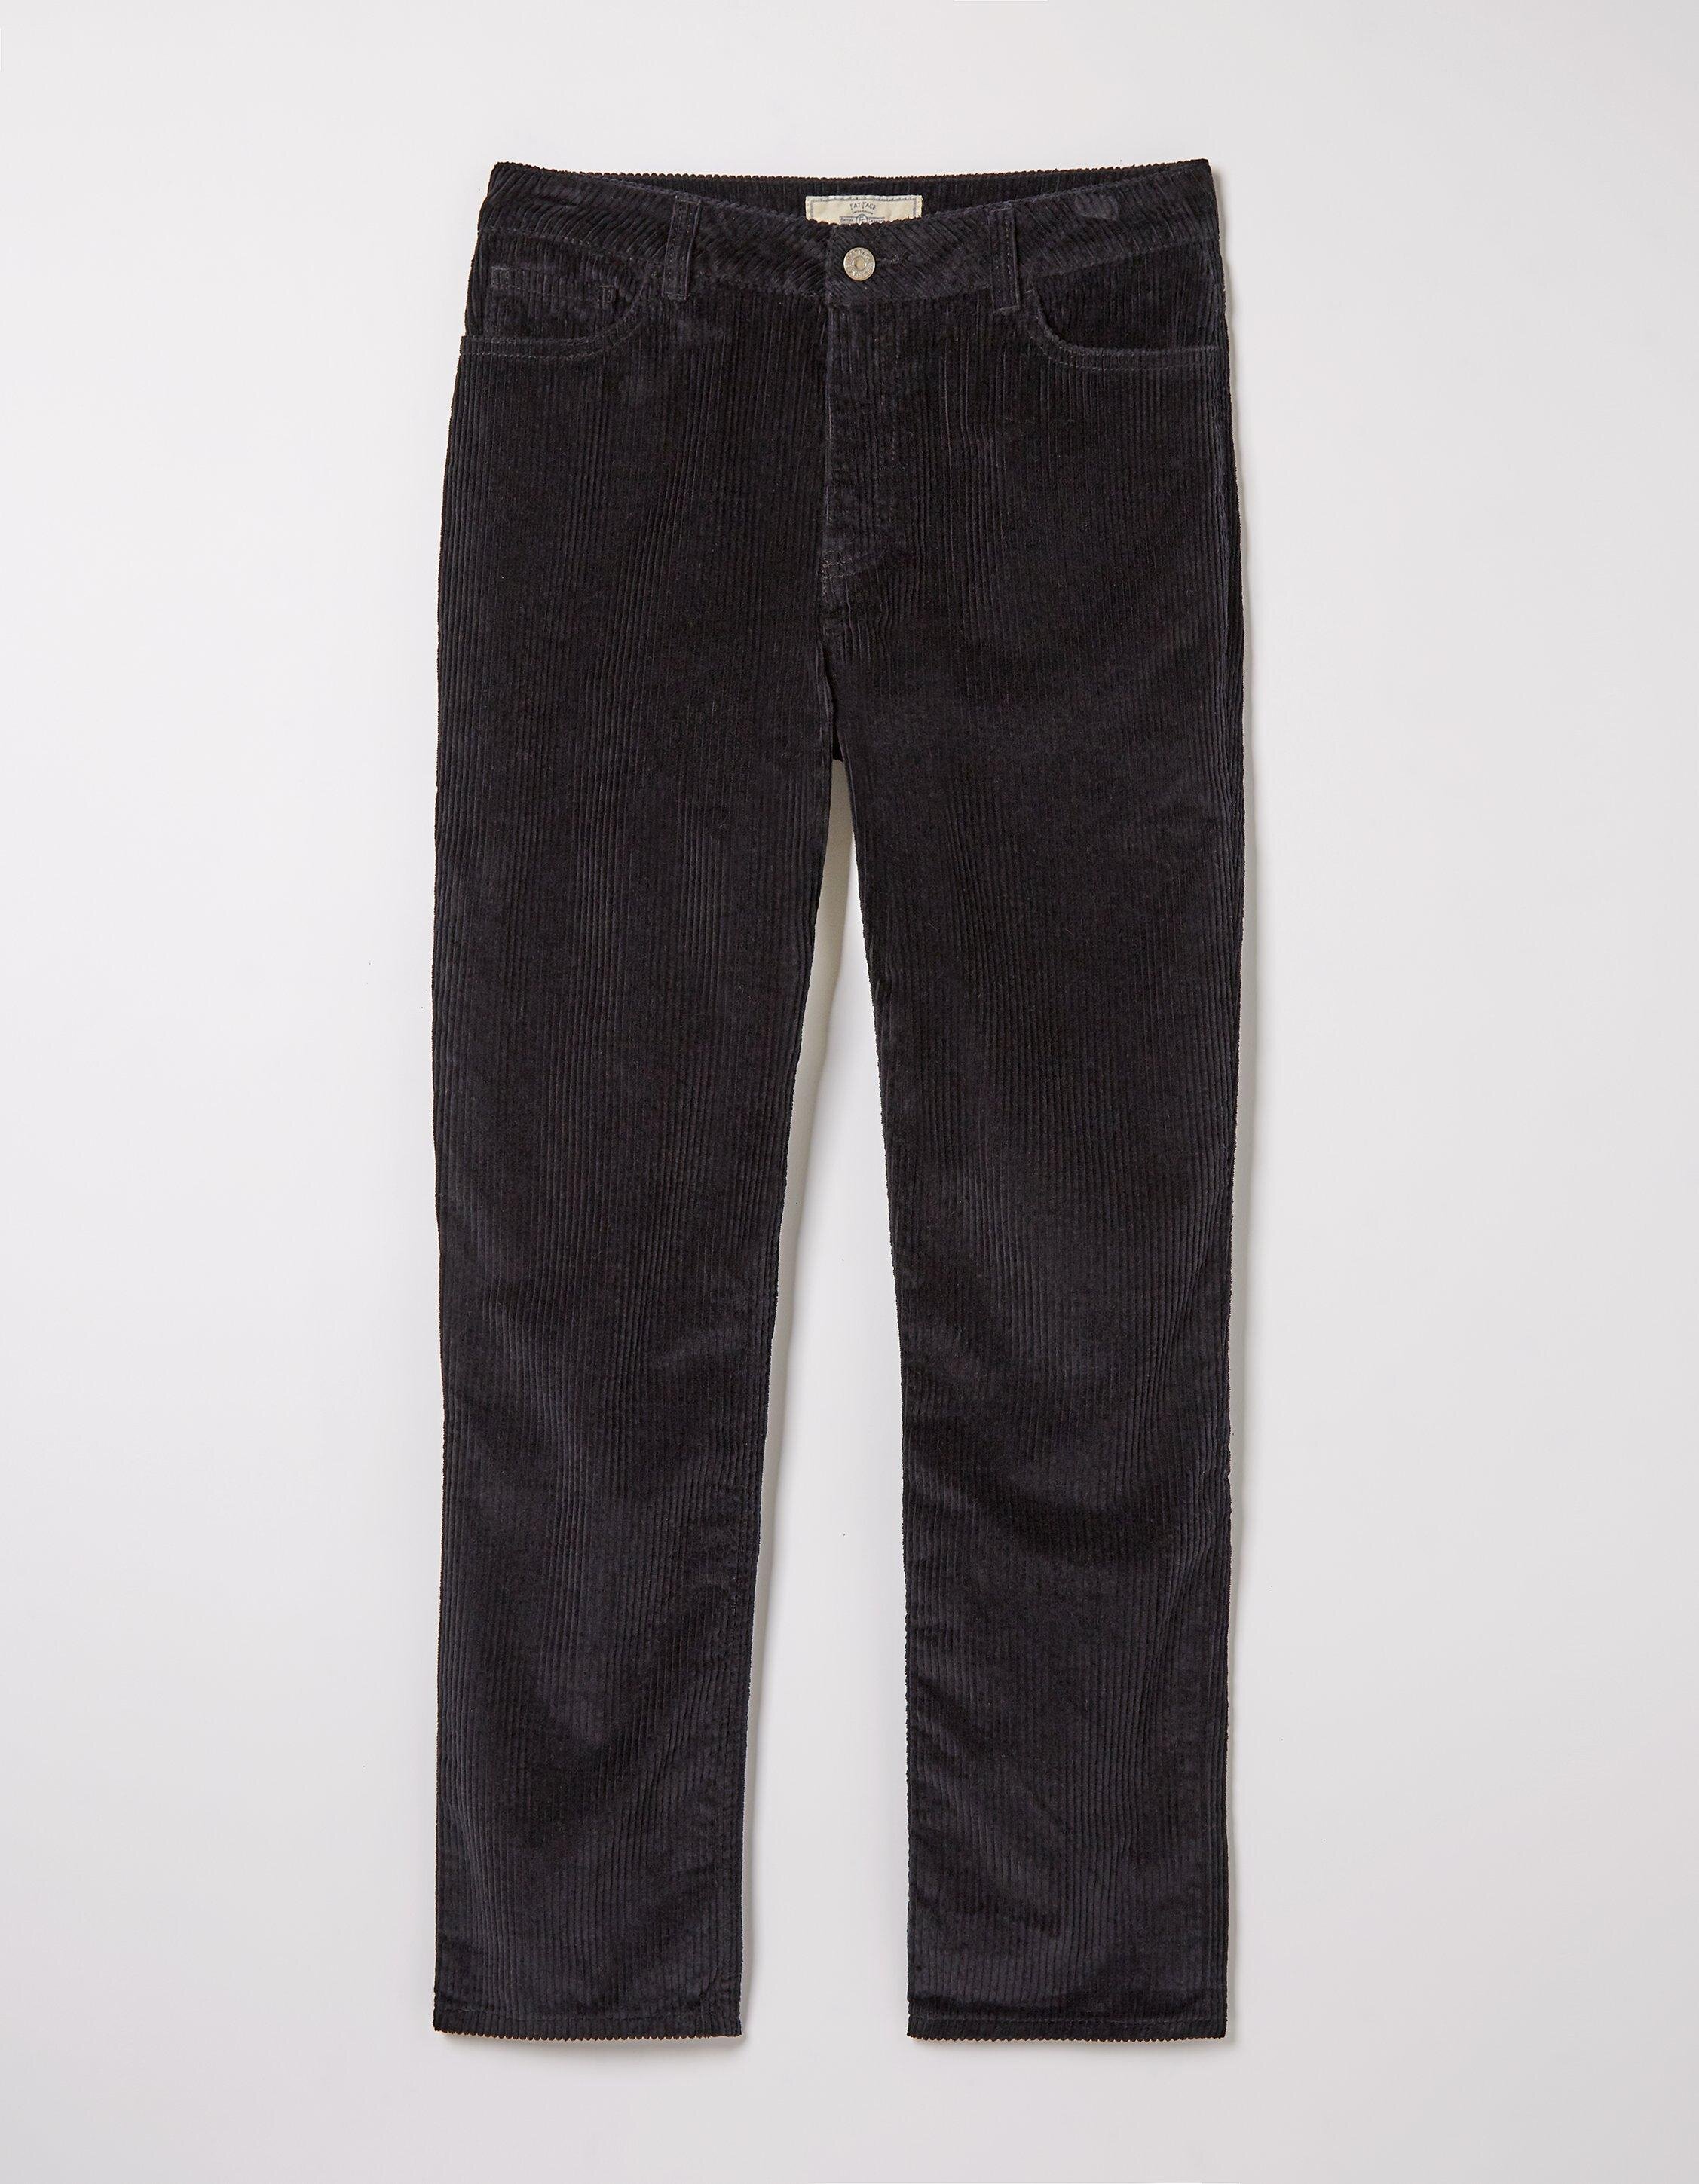 Fat Face 'Short' Cord Trousers £49.50